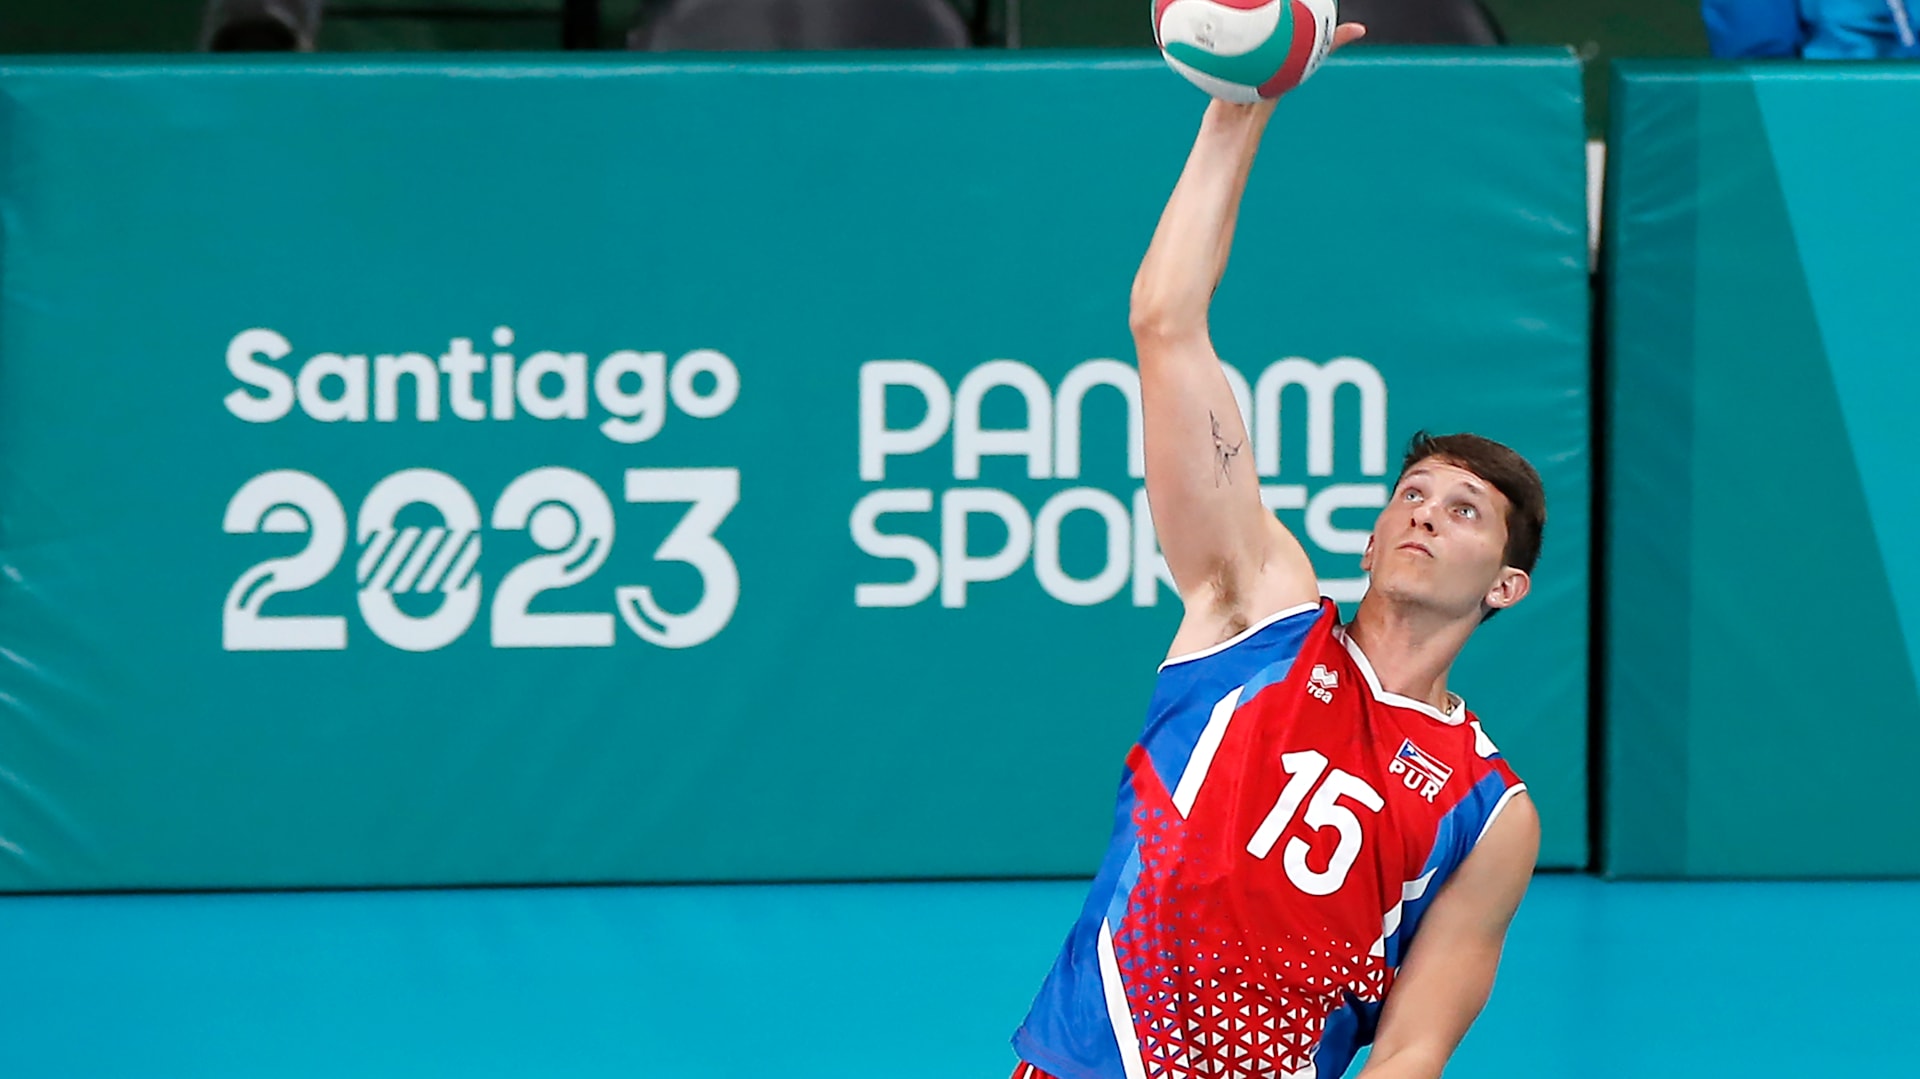 U.S. Medals at 2023 Pan Am Games - USA Volleyball